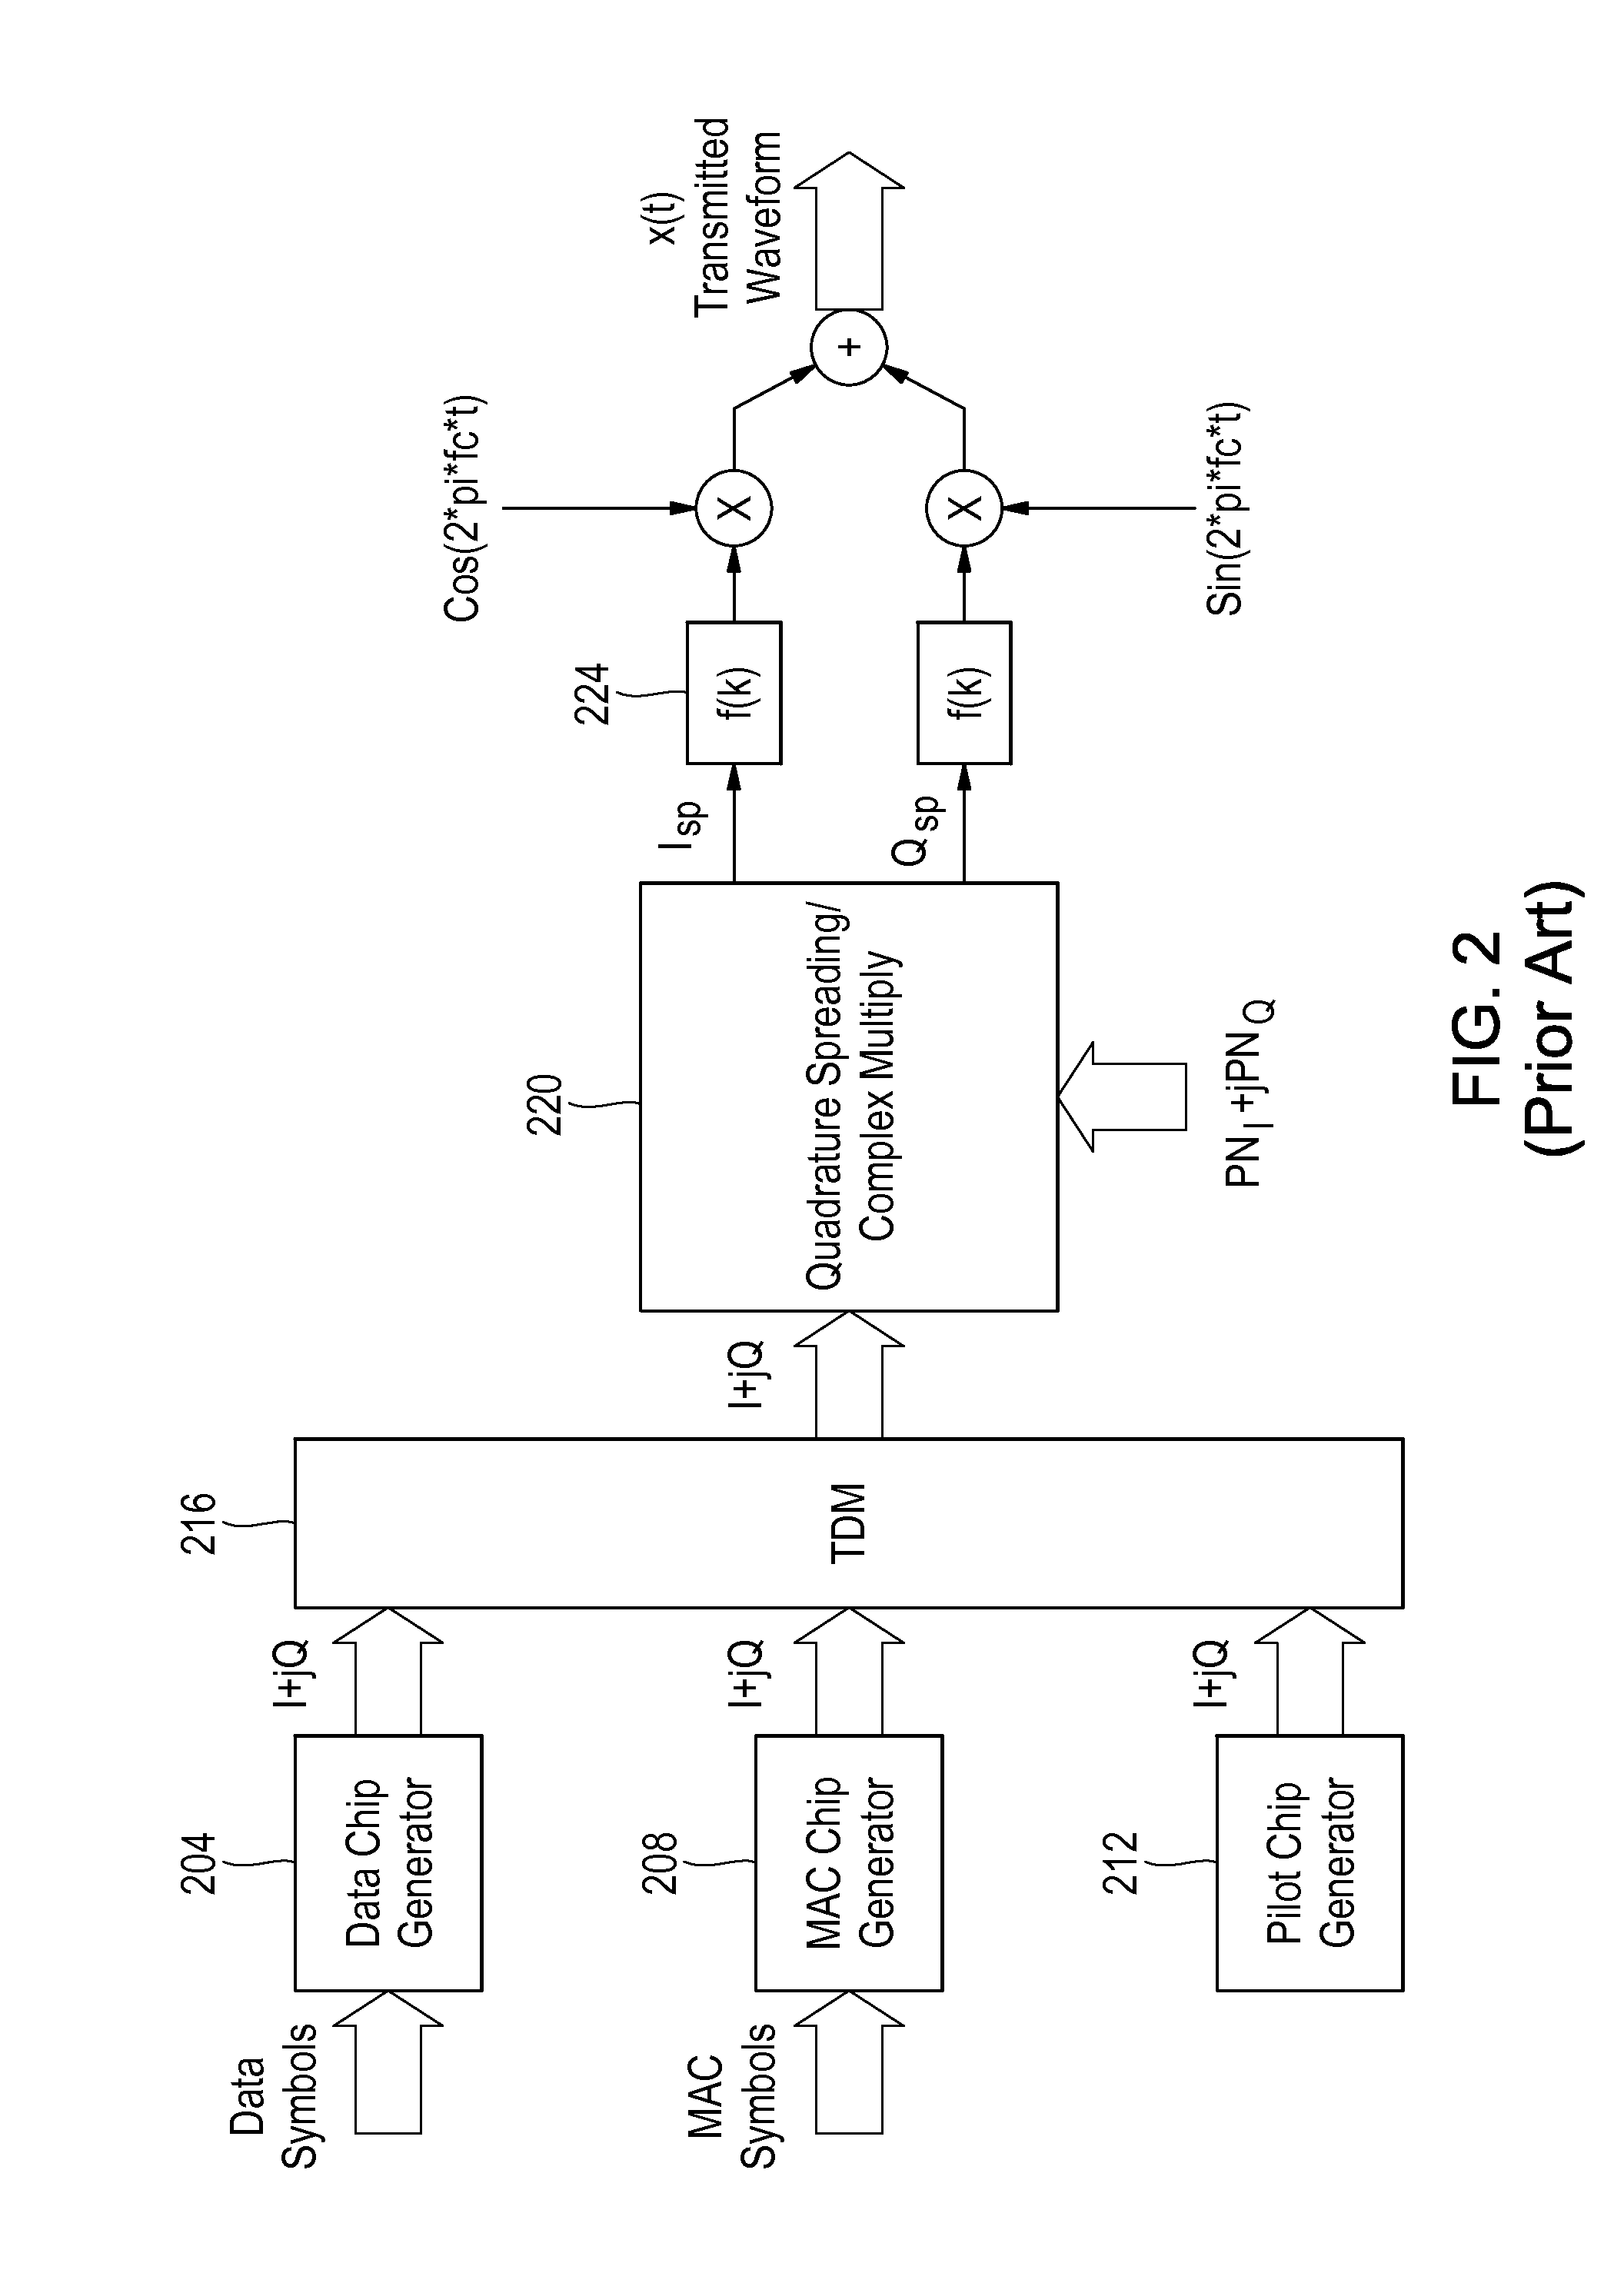 Systems and Methods for Serial Cancellation